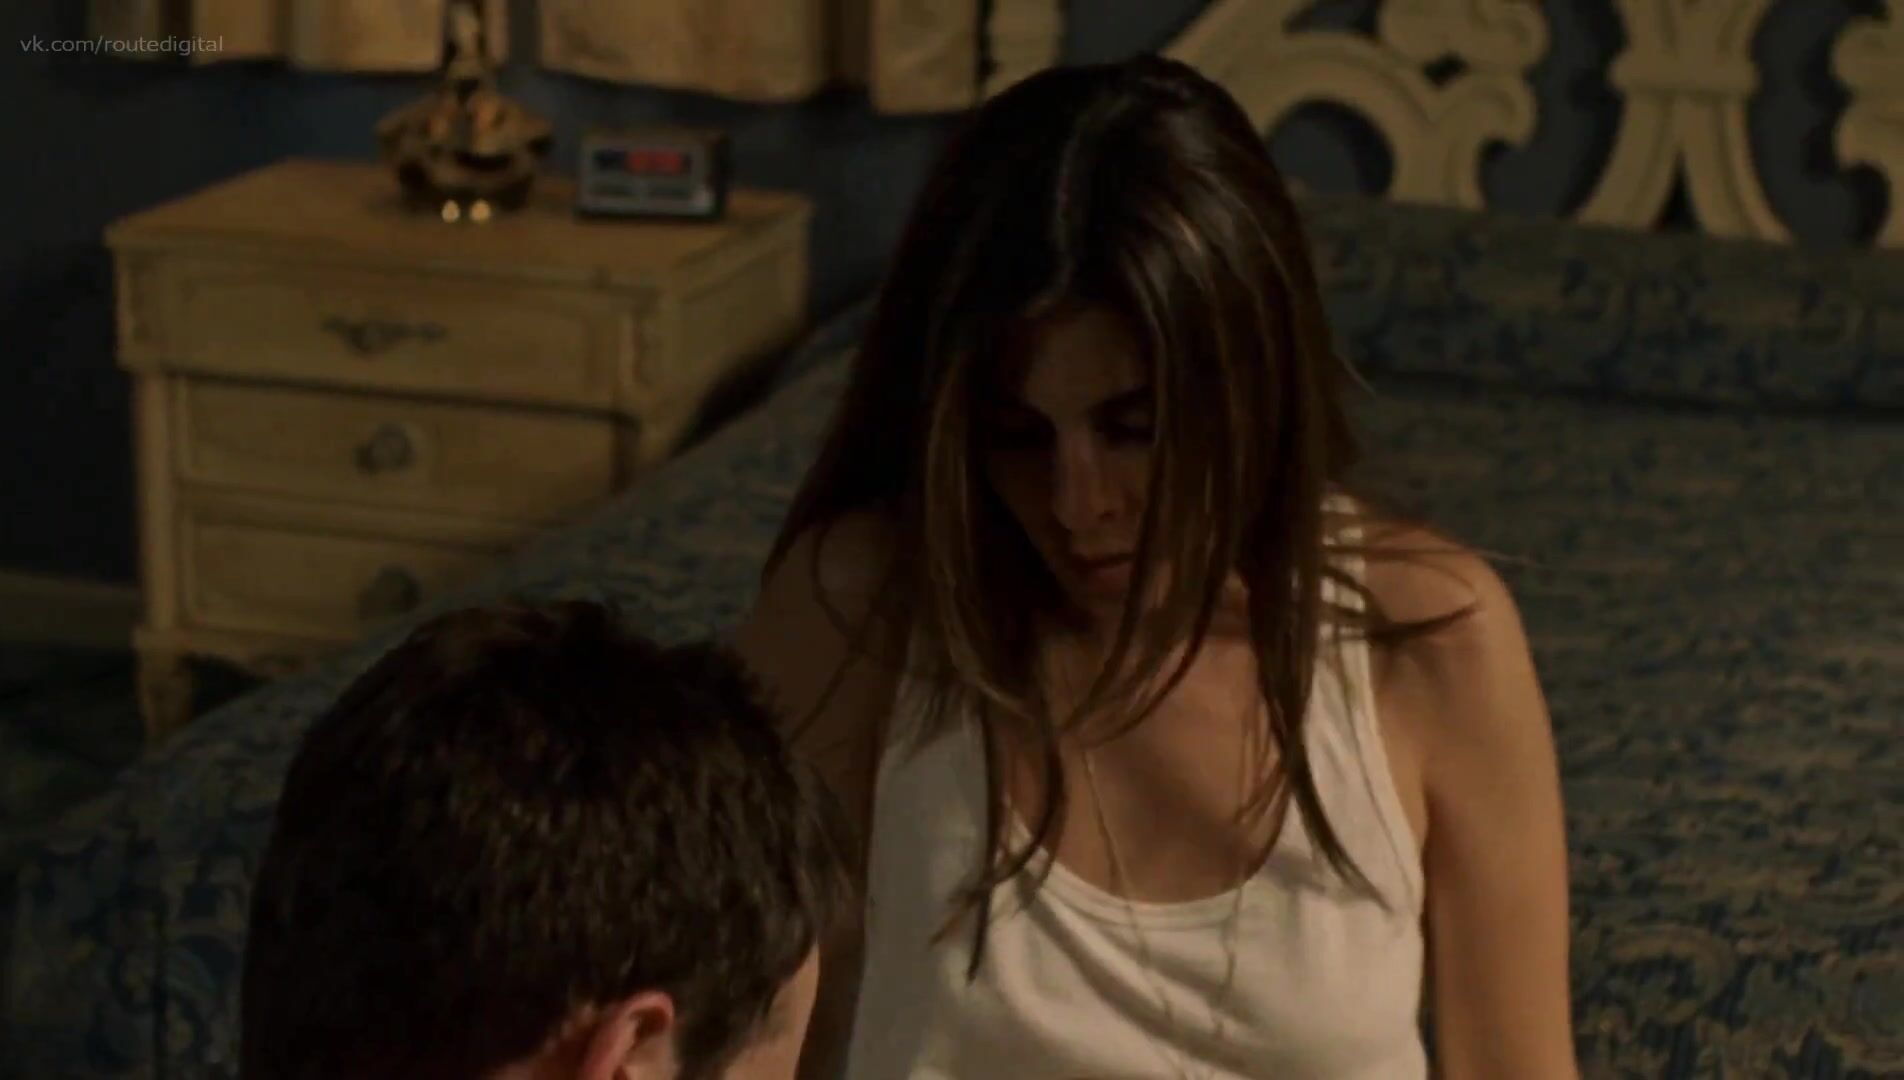 Culo Jamie Lynn Sigler nude love for sex isn't a secret anymore so she fools around in movie Shaking - 2